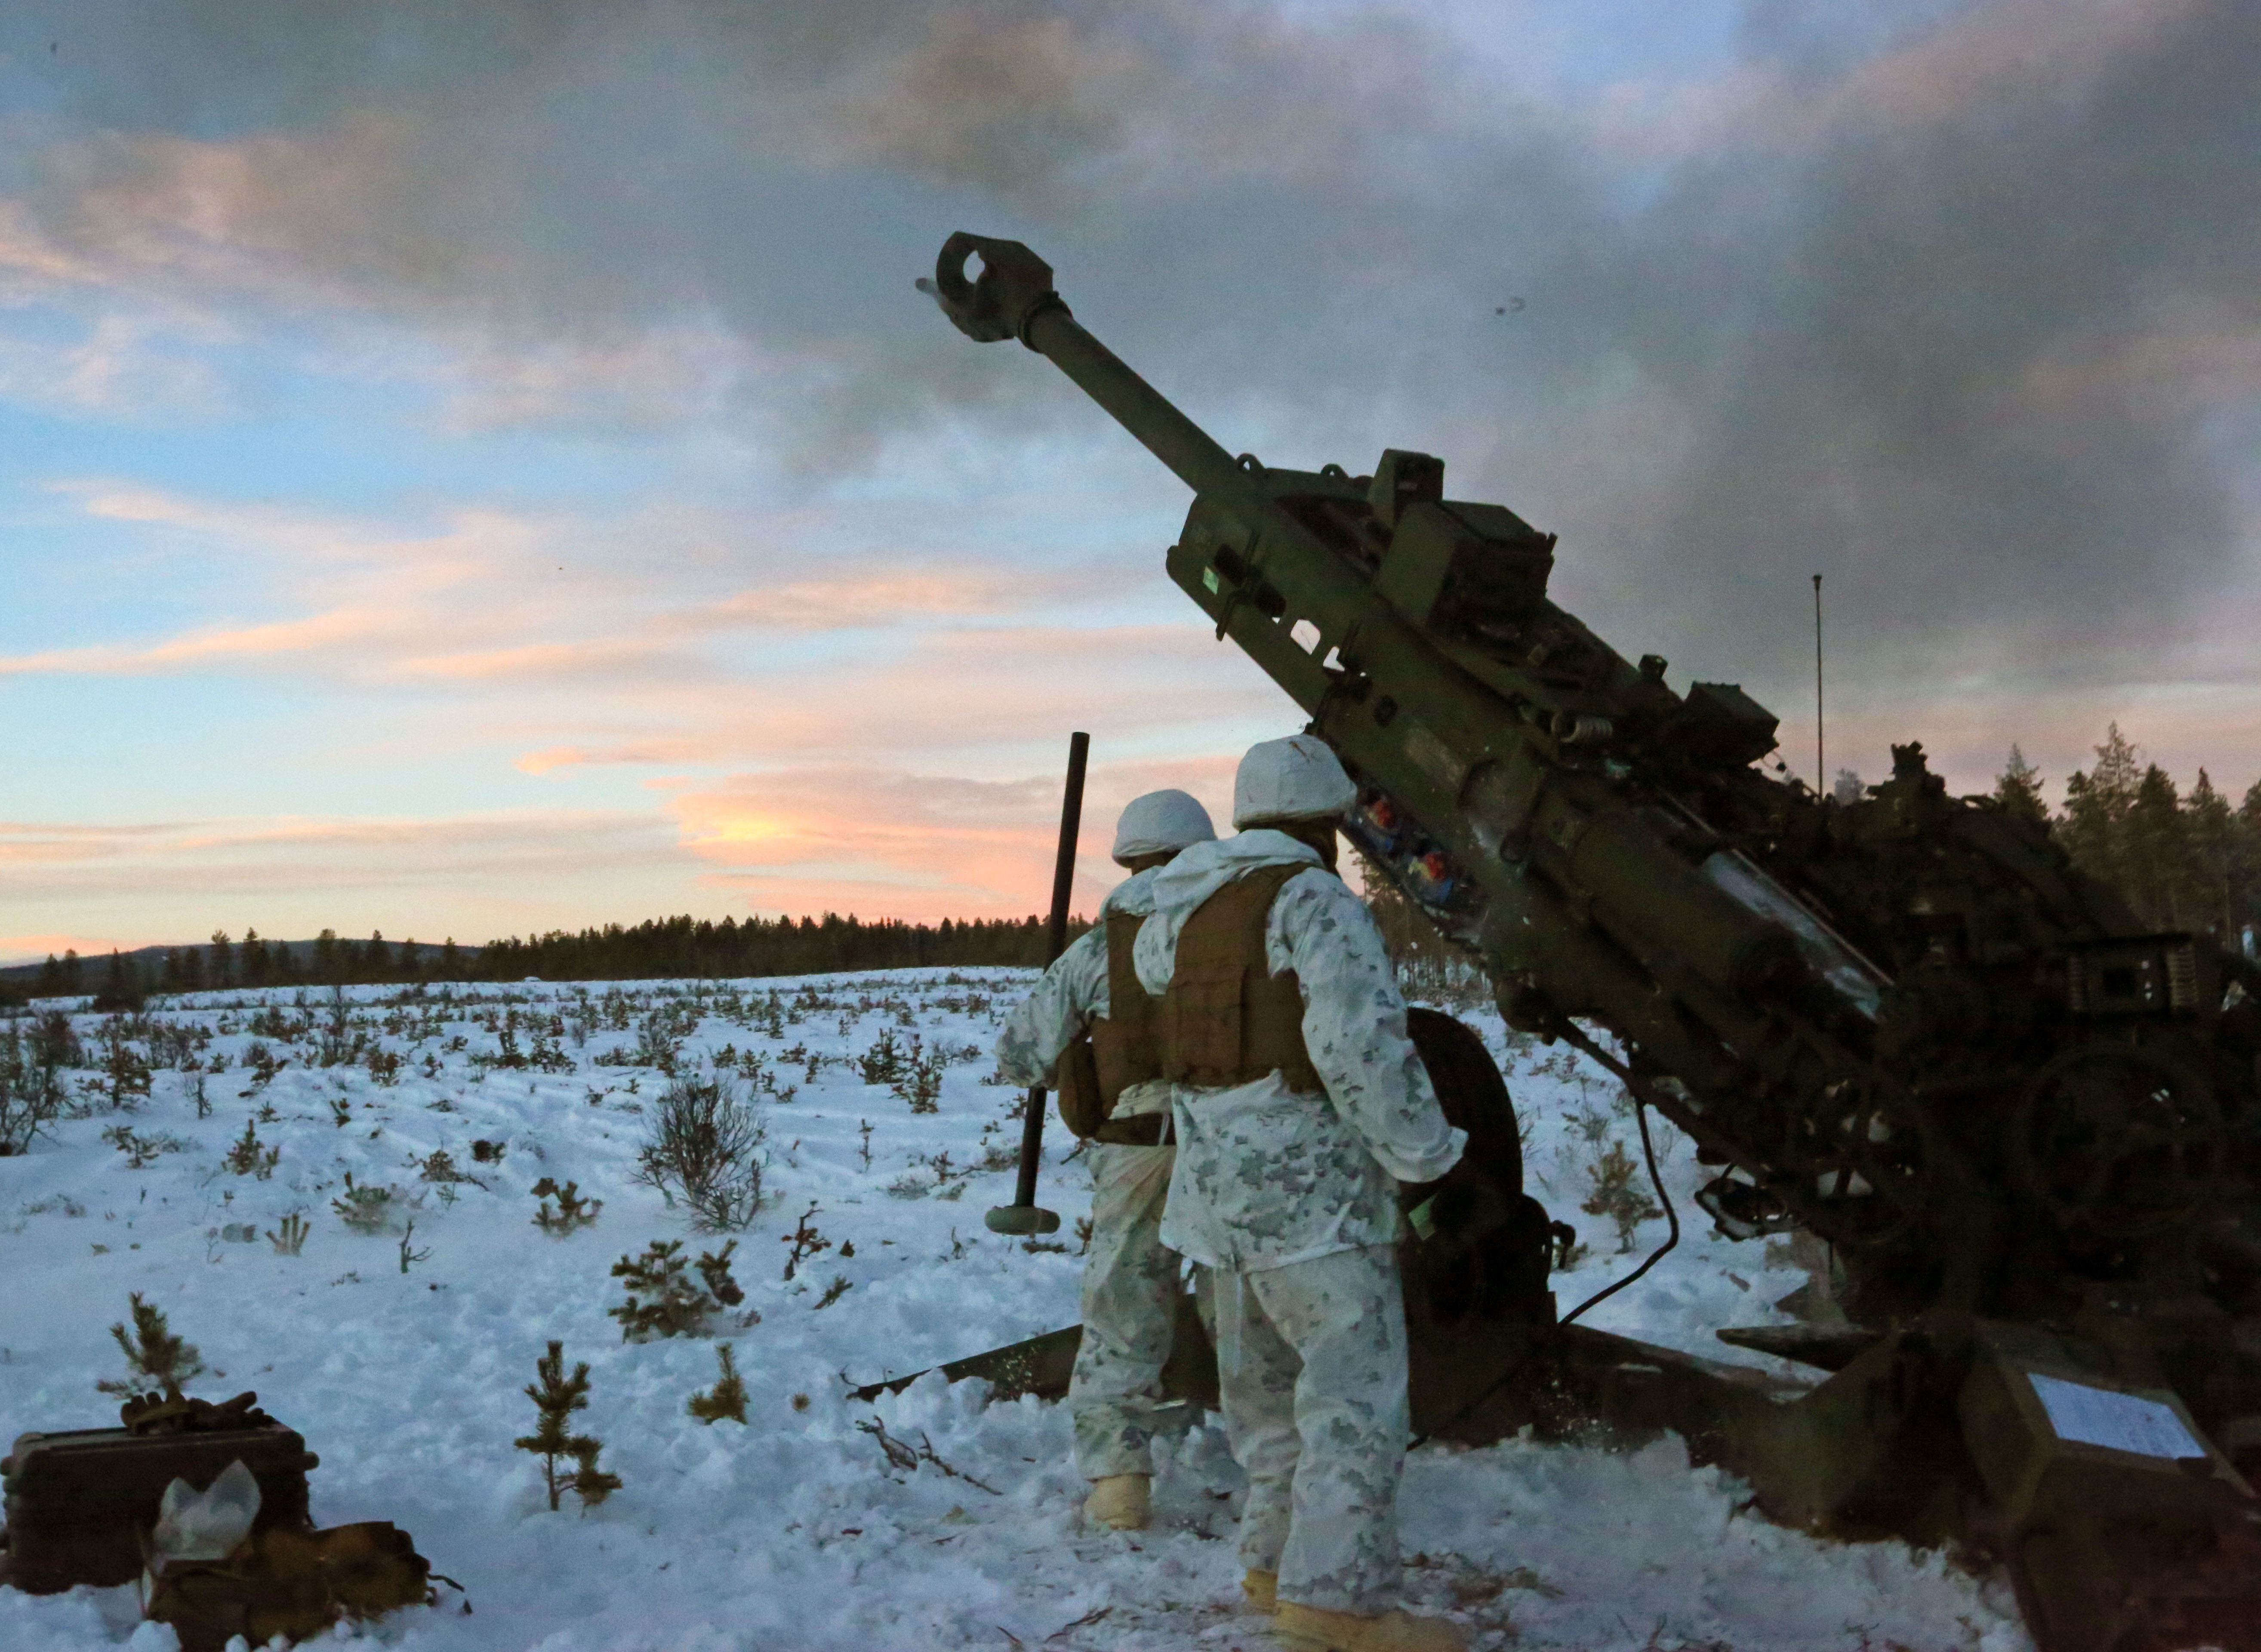 Marines with Combined Arms Company, step back as an M777 Howitzer fires a round during a live-fire shoot in Rena, Norway, Feb. 23, 2016. U.S. Marine Corps Photo